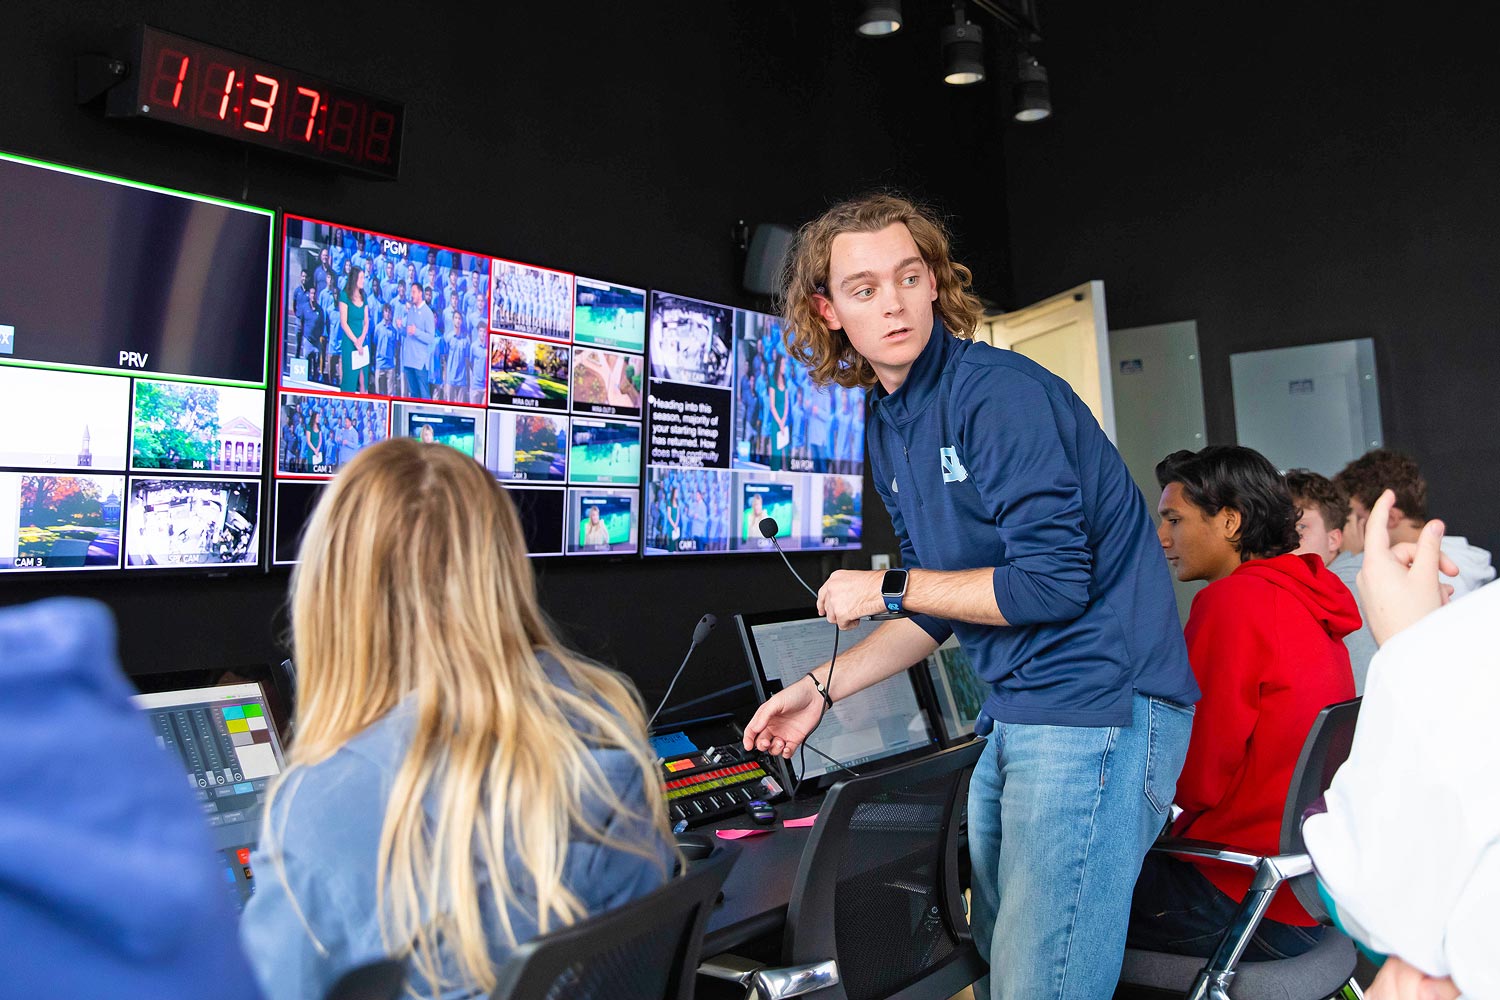 James F. Goodman broadcast studio control room, staffed by students, is a beehive of activity during a live broadcast.